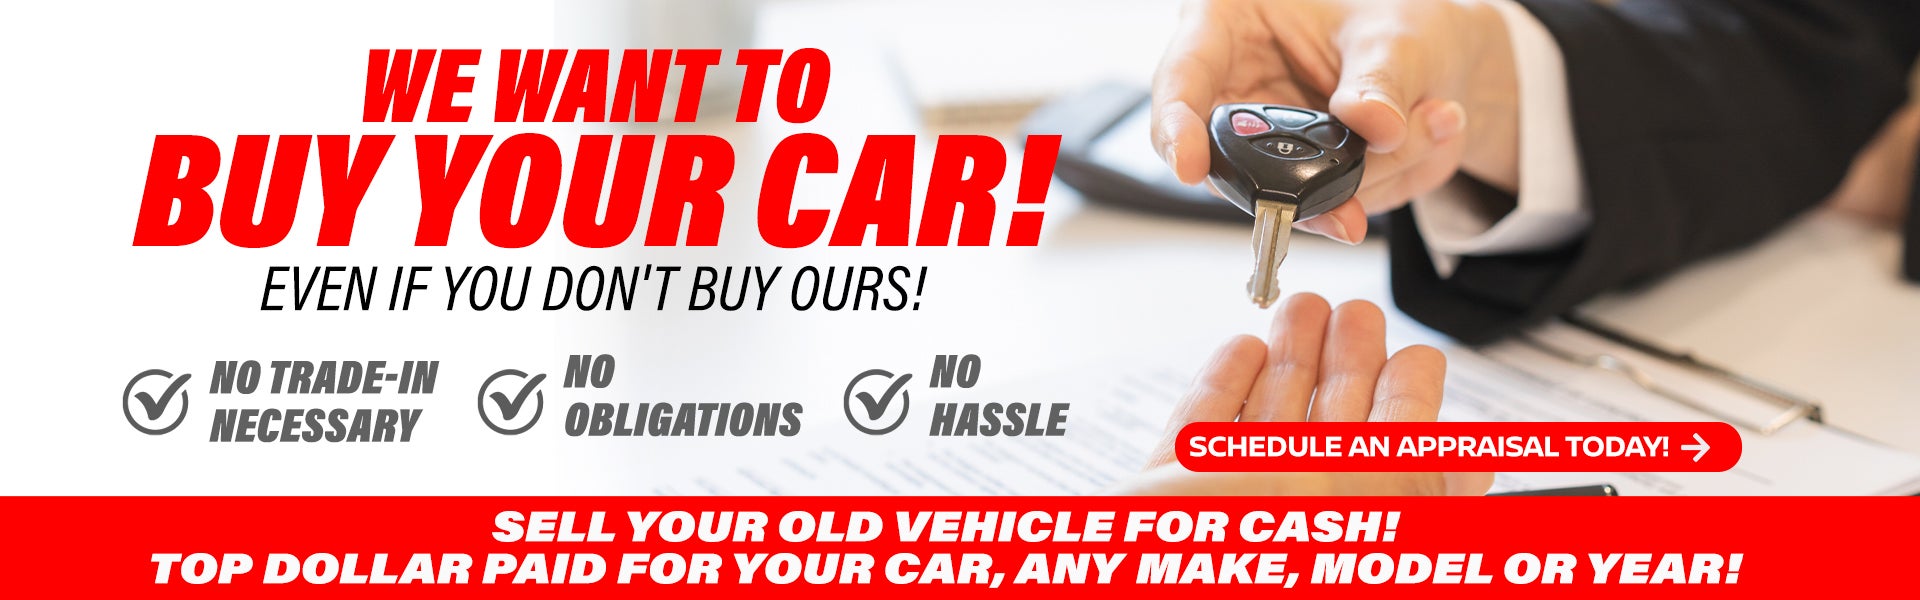 We want to buy your car. Even if you don't buy ours